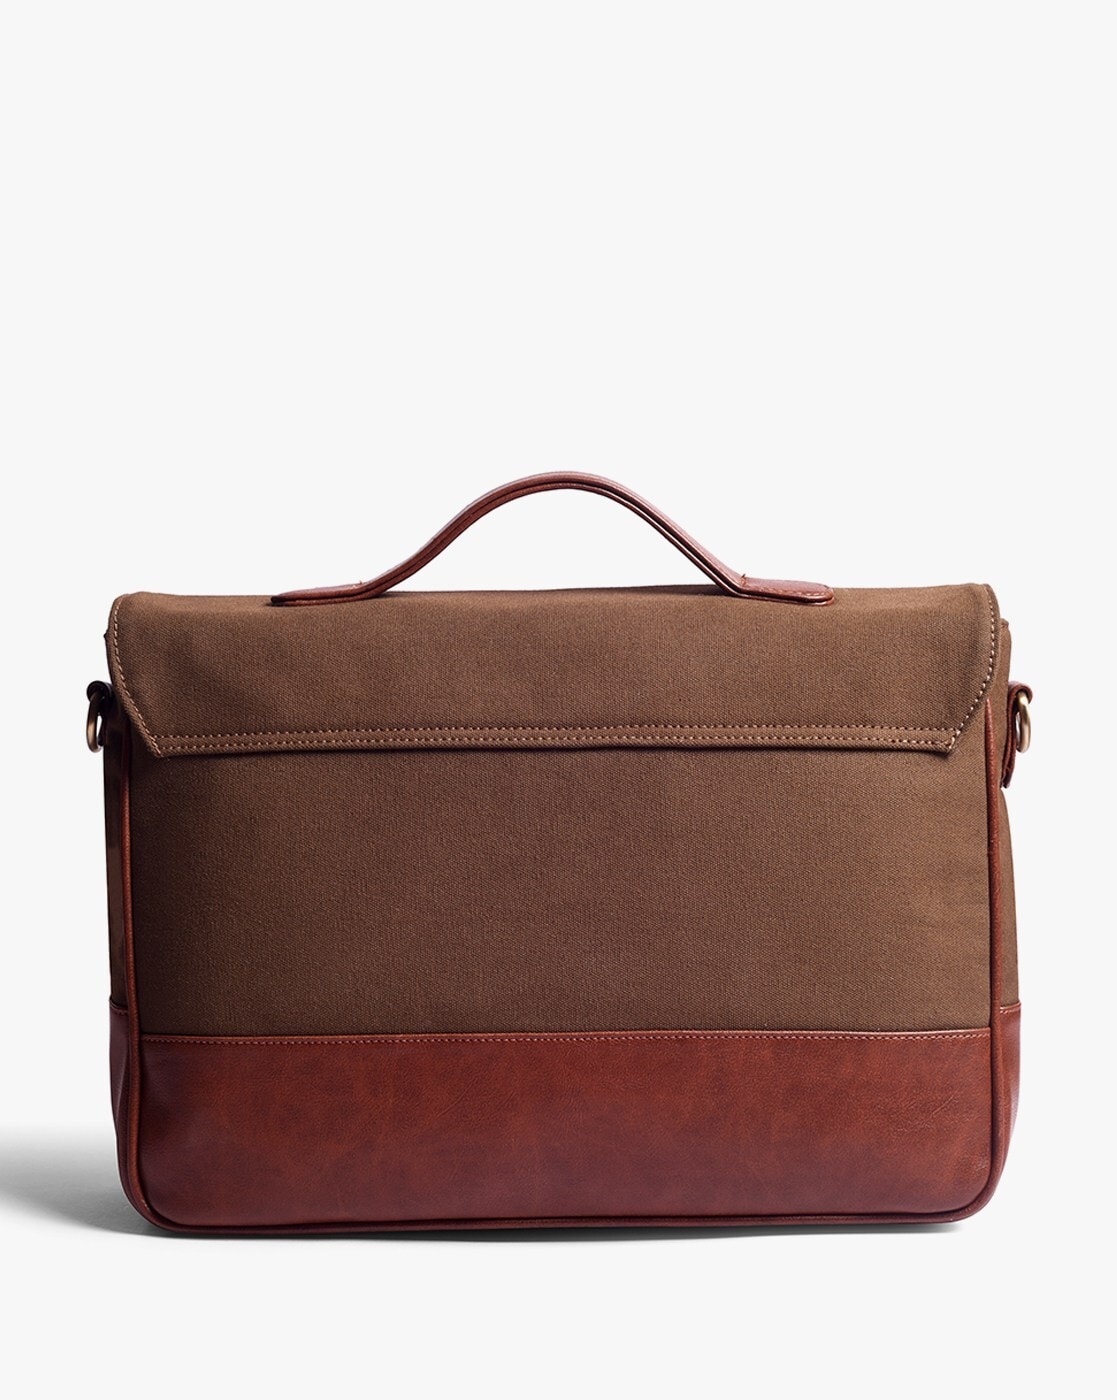 Office Laptop Bags for Women and Ladies Crafted in Leather